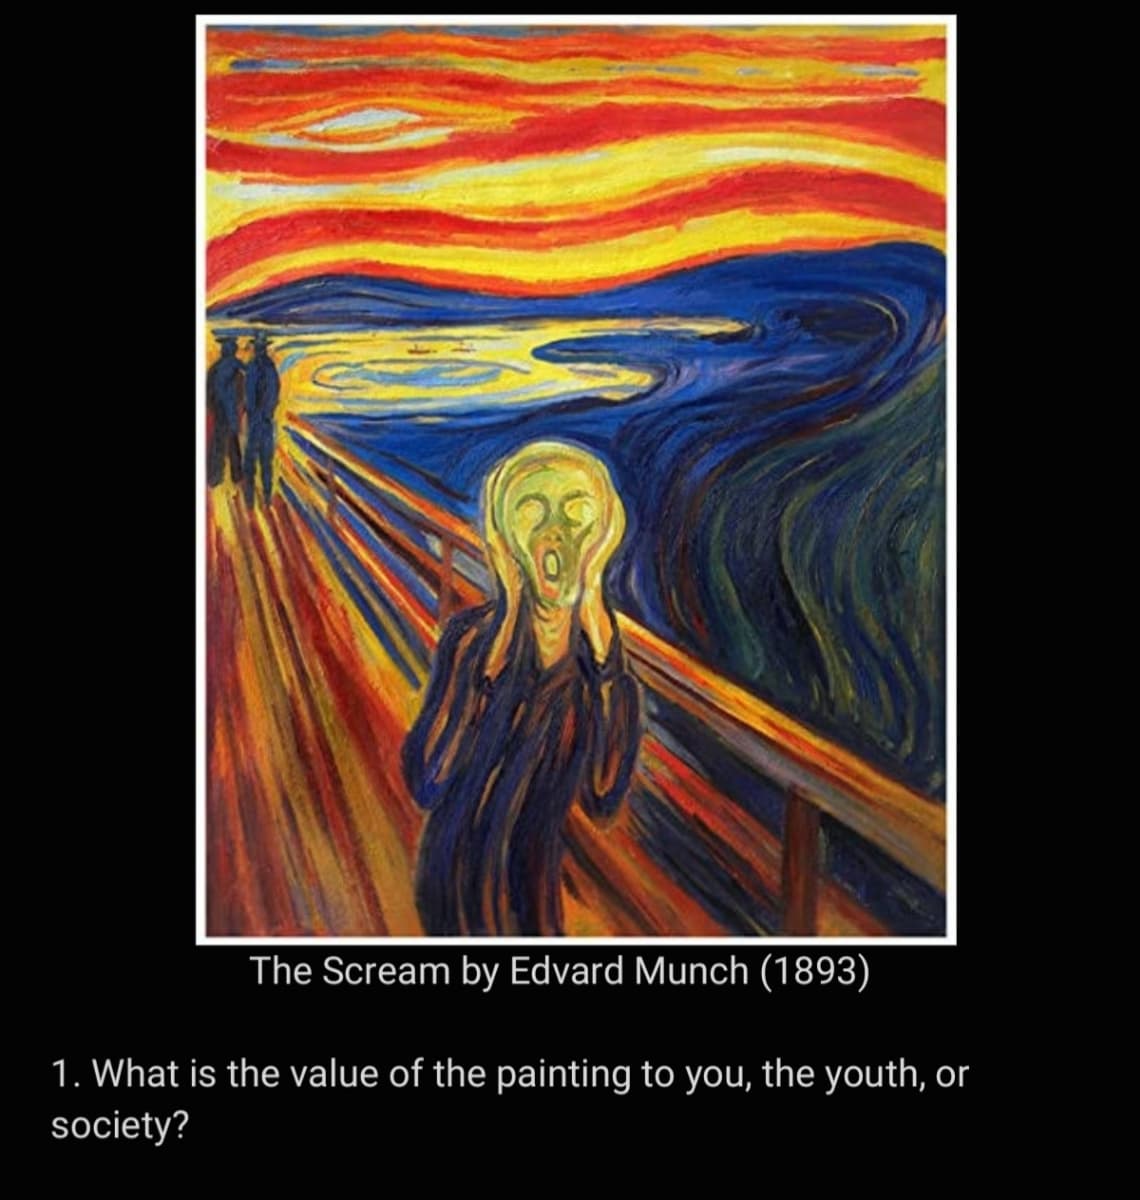 The Scream by Edvard Munch (1893)
1. What is the value of the painting to you, the youth, or
society?
